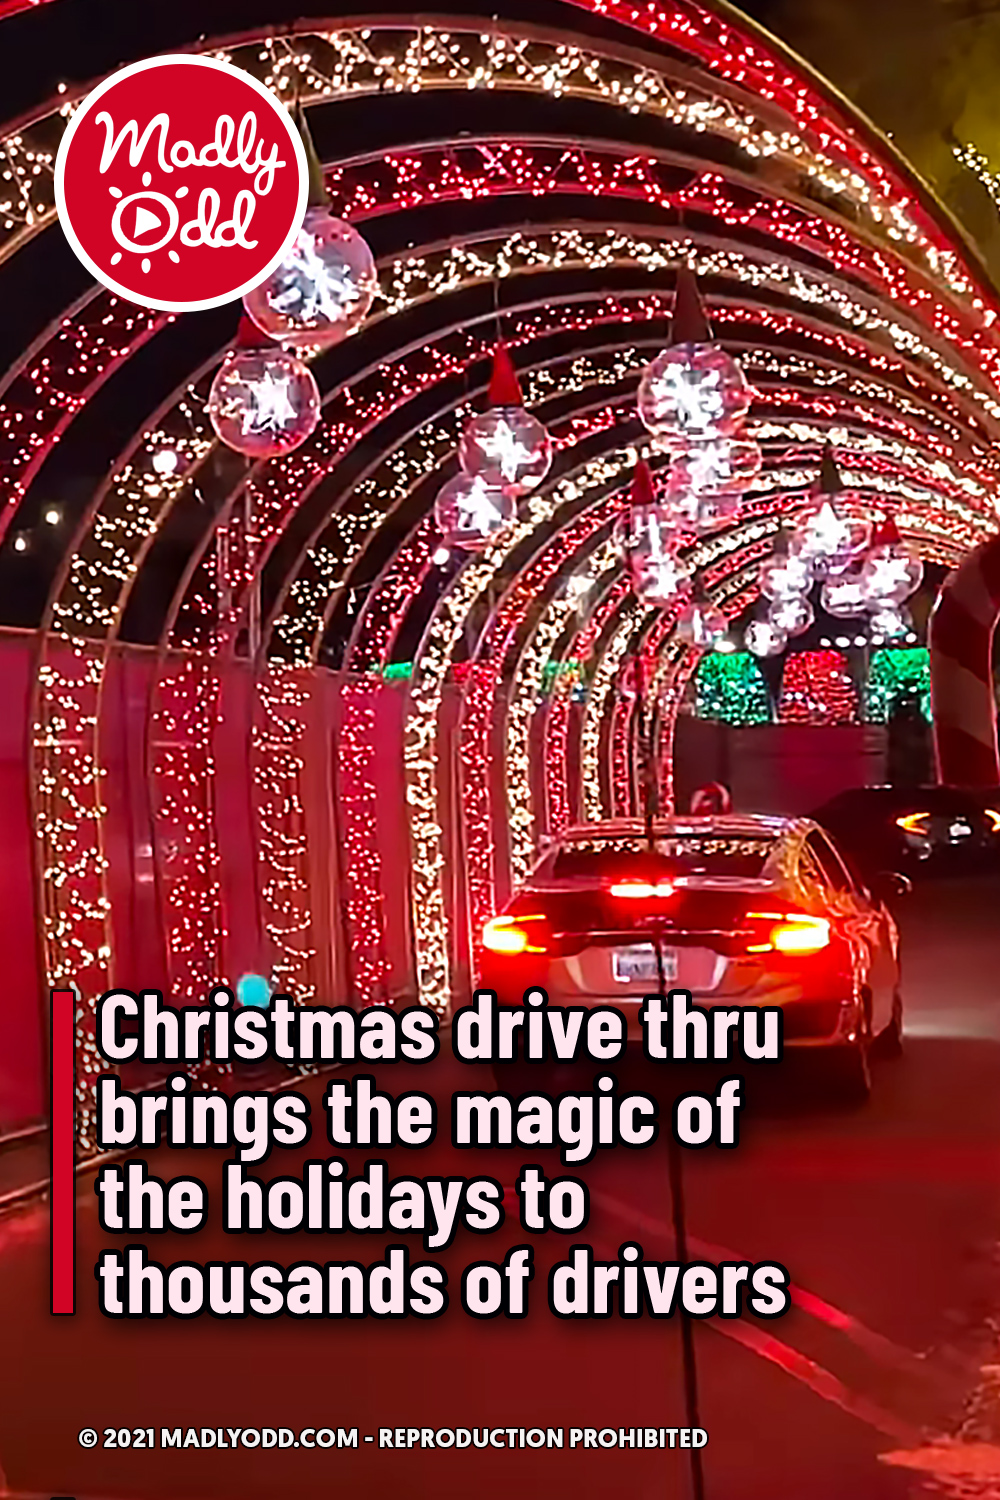 Christmas drive thru brings the magic of the holidays to thousands of drivers